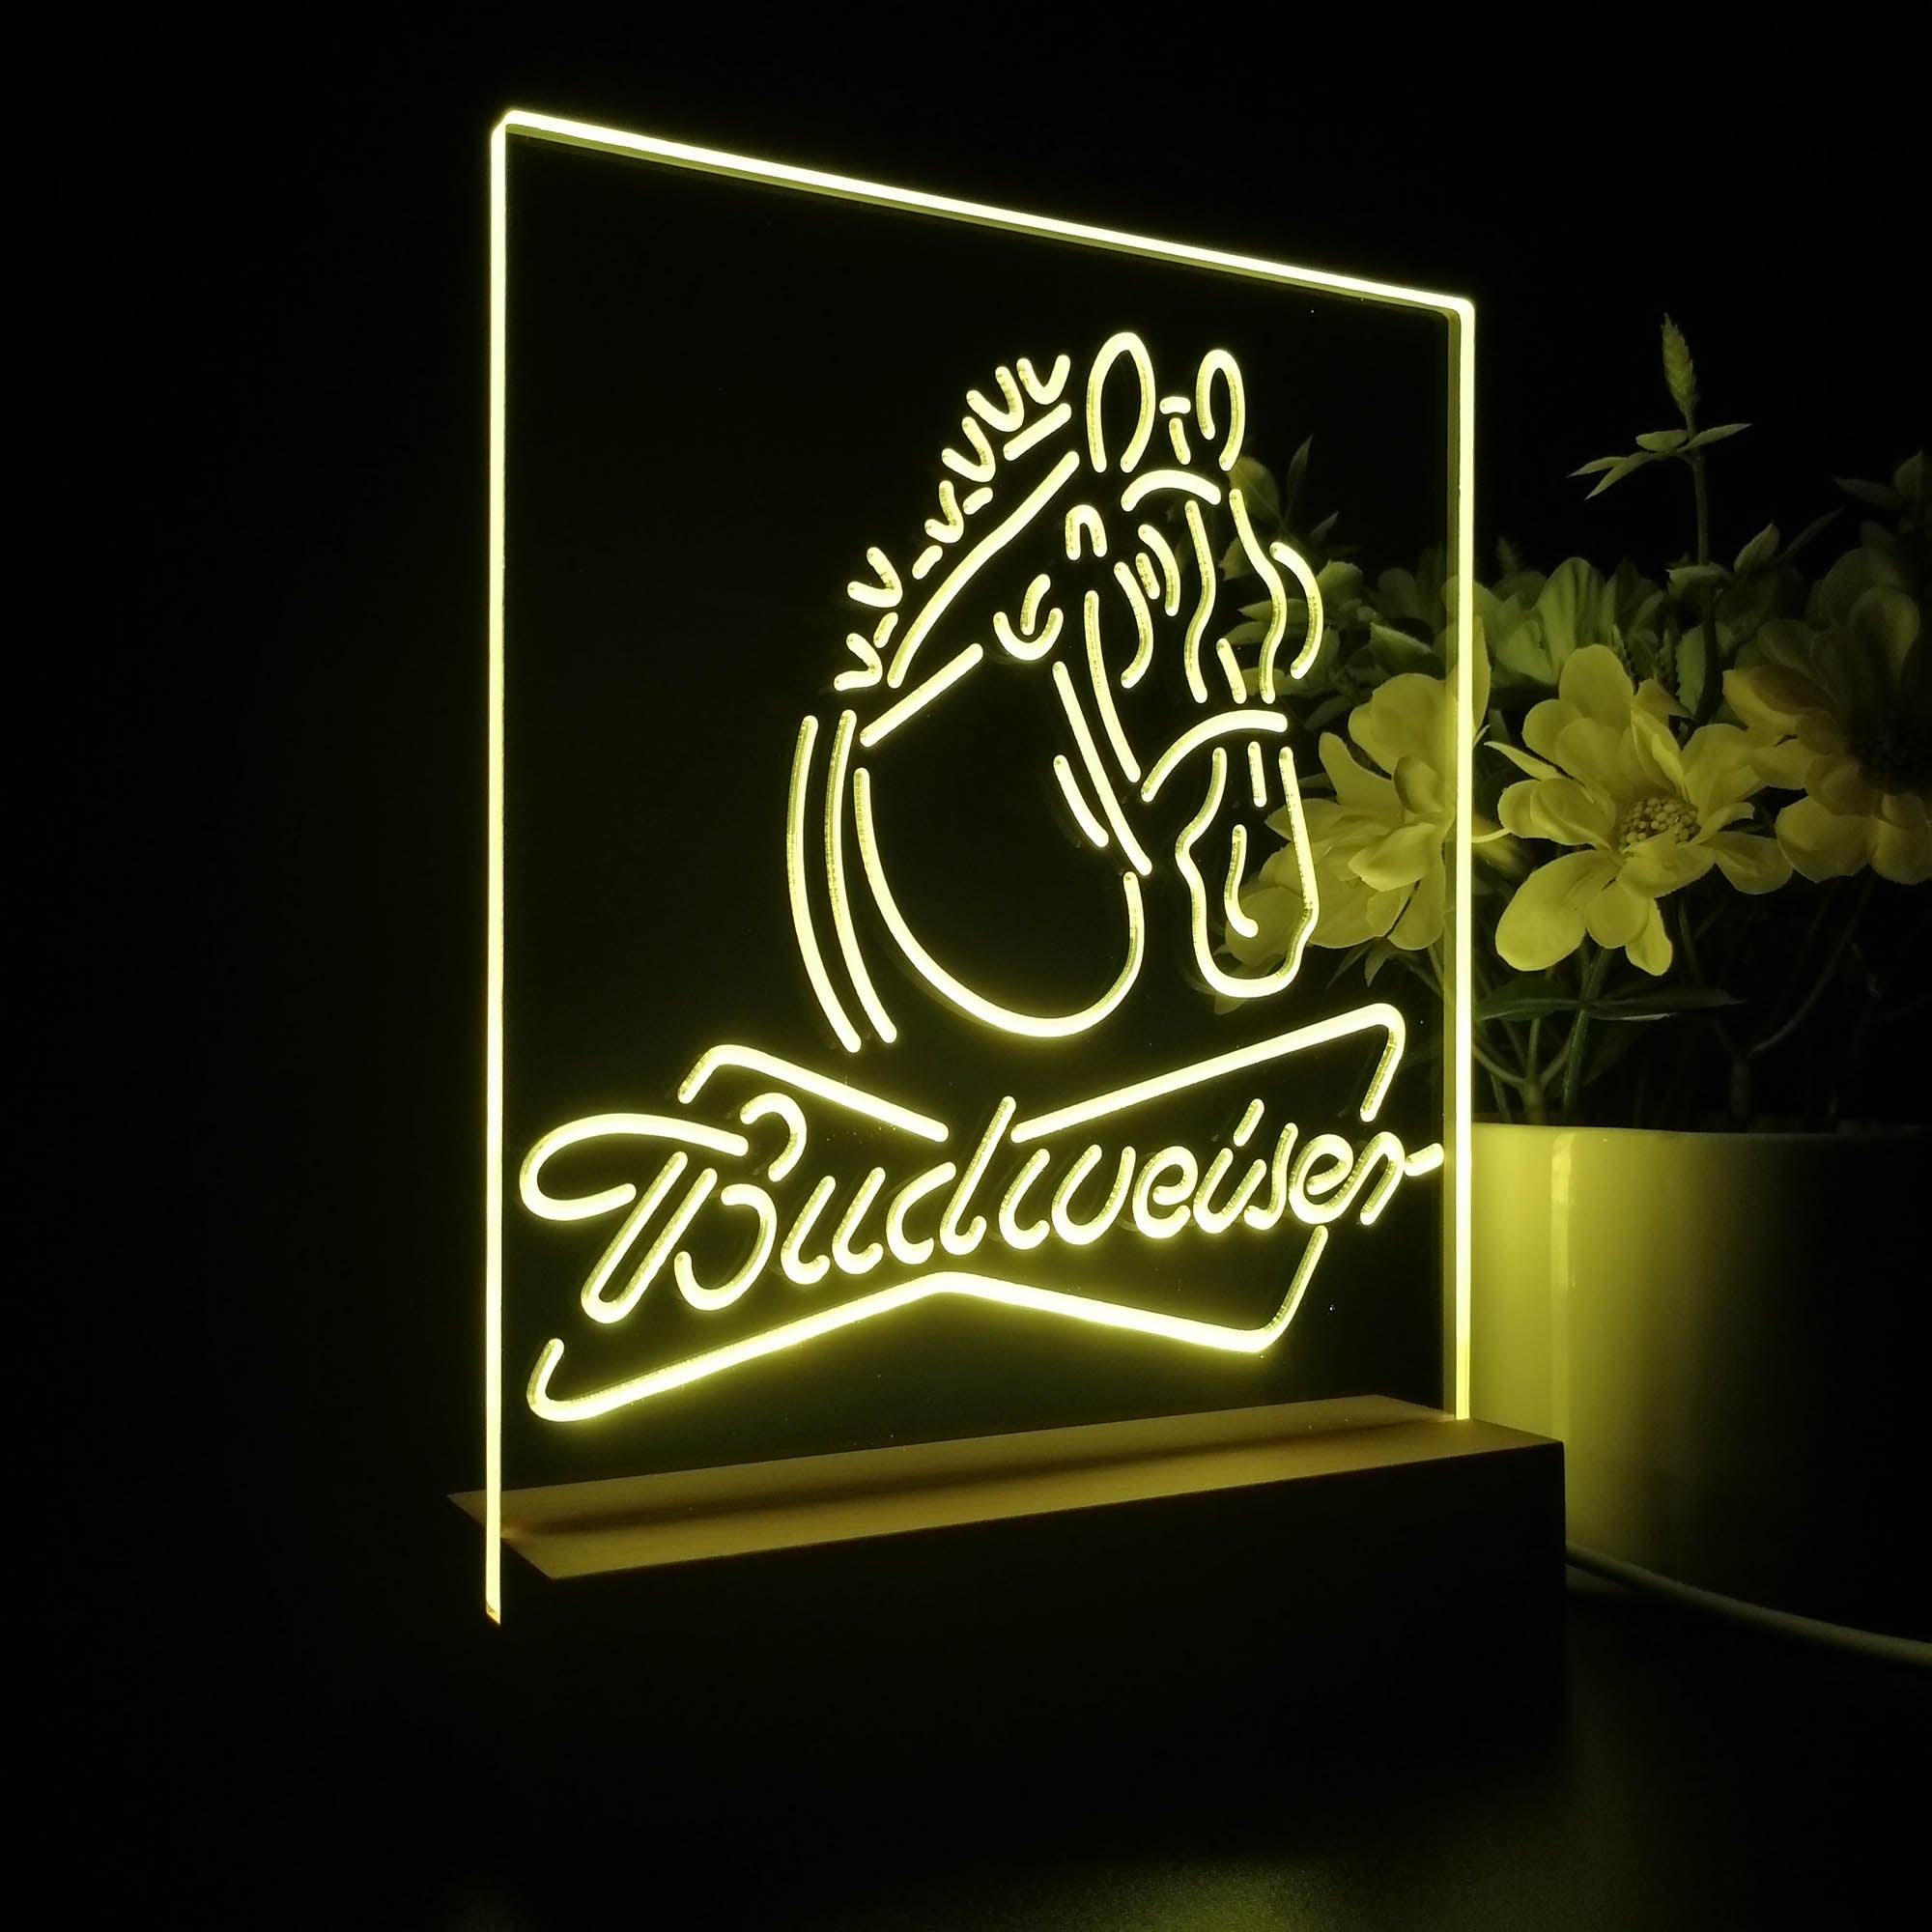 Budweiser Clydesdale Horse Head Night Light LED Sign